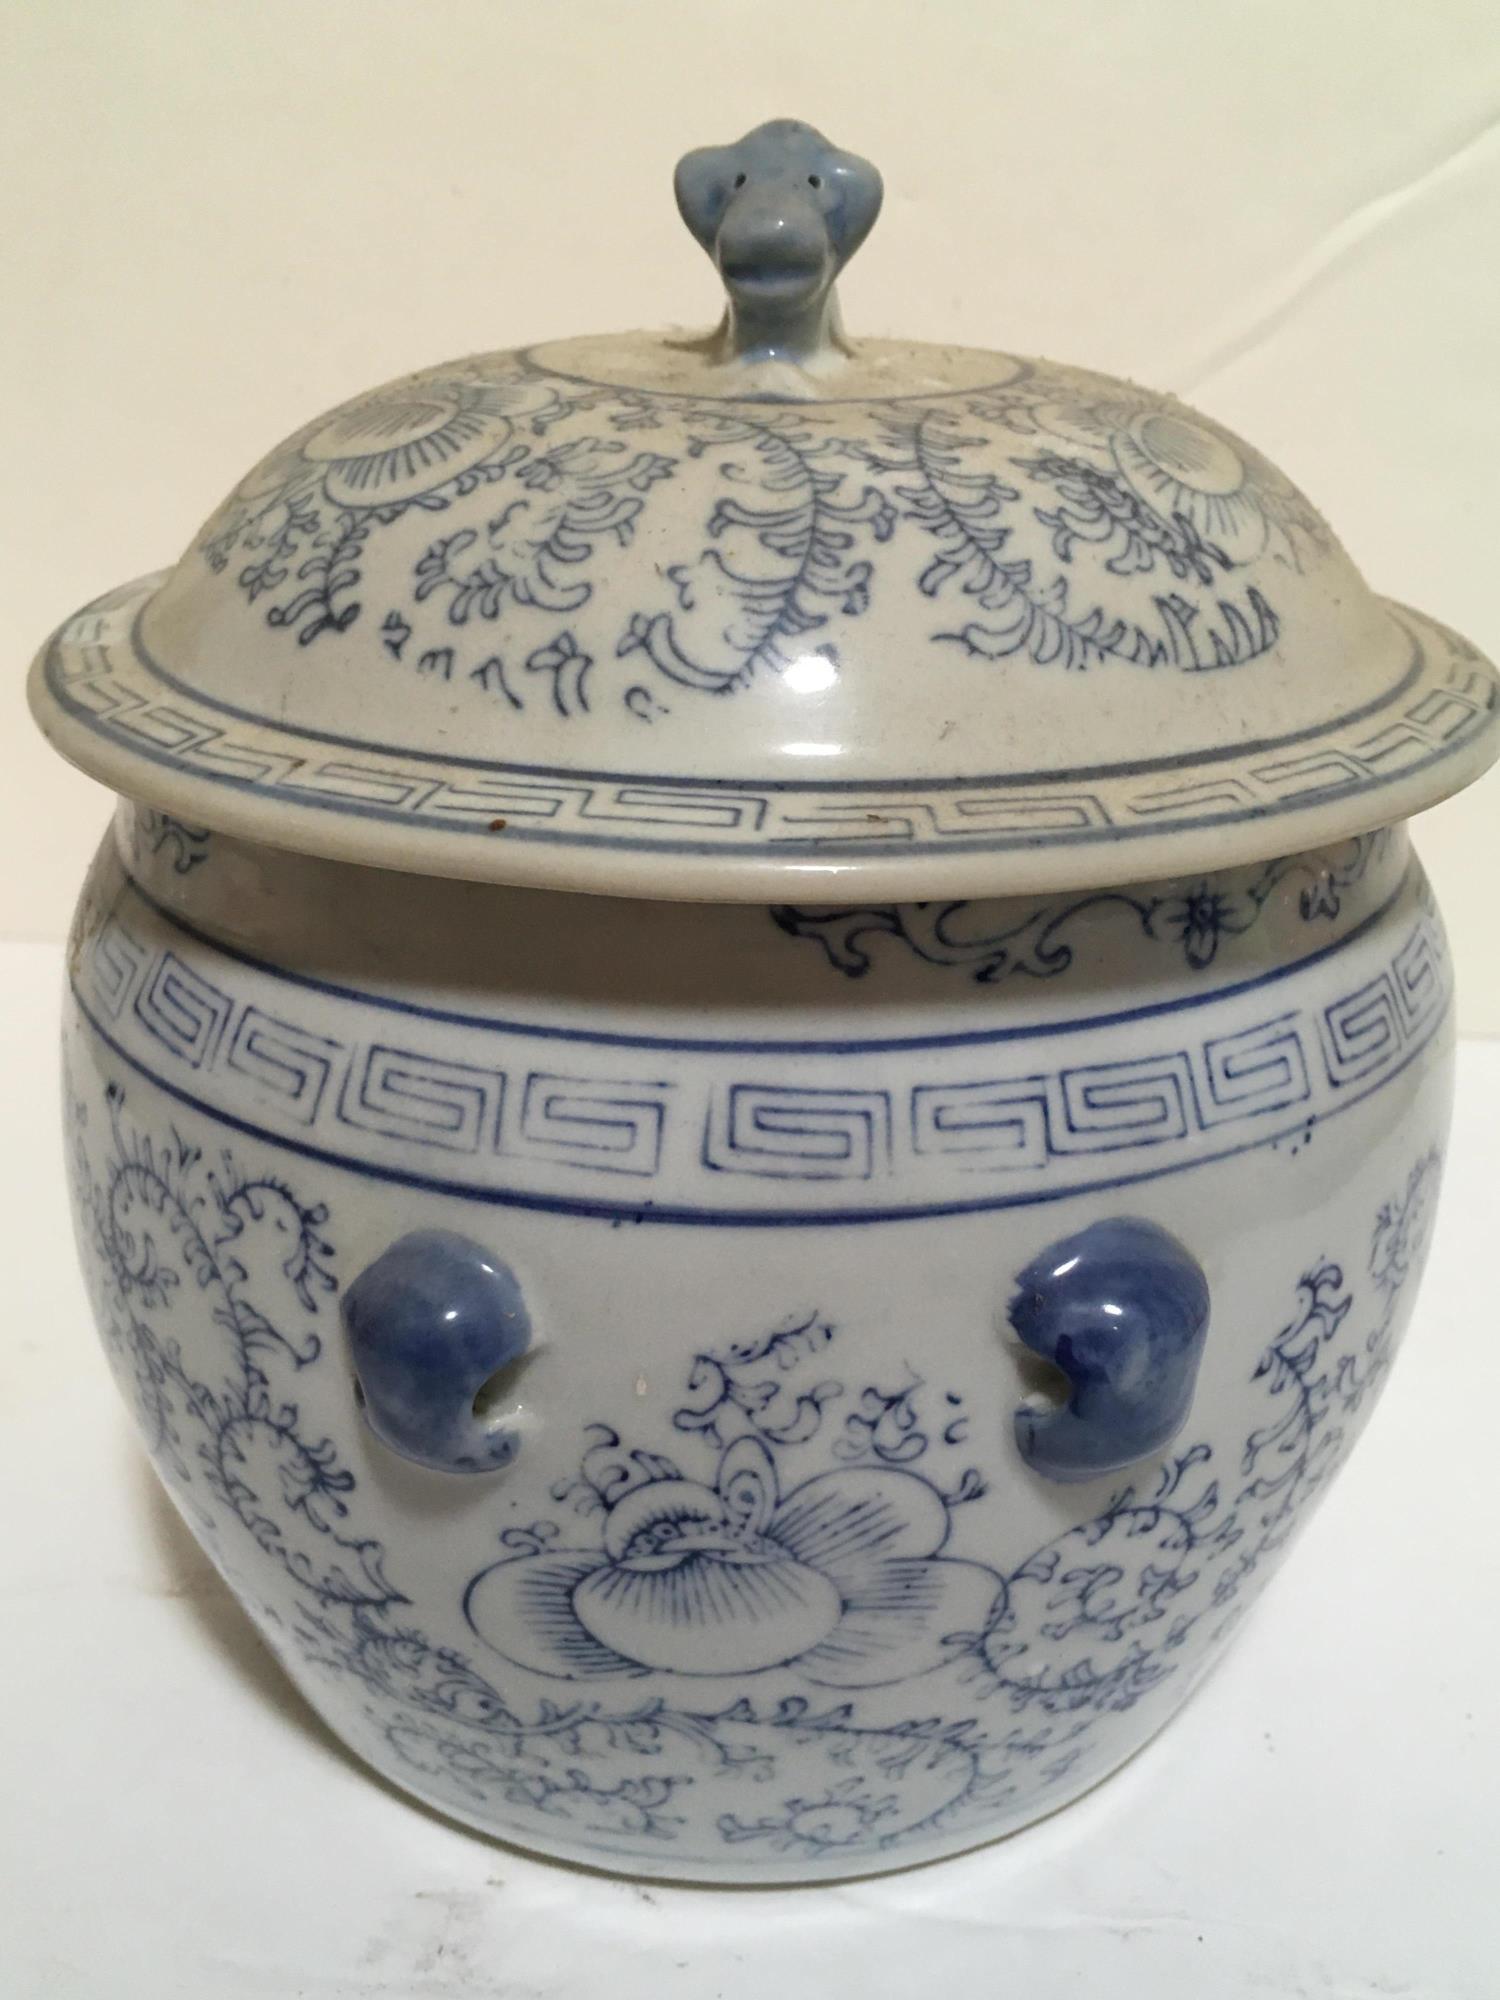 LIDDED BLUE AND WHITE ASIAN URN